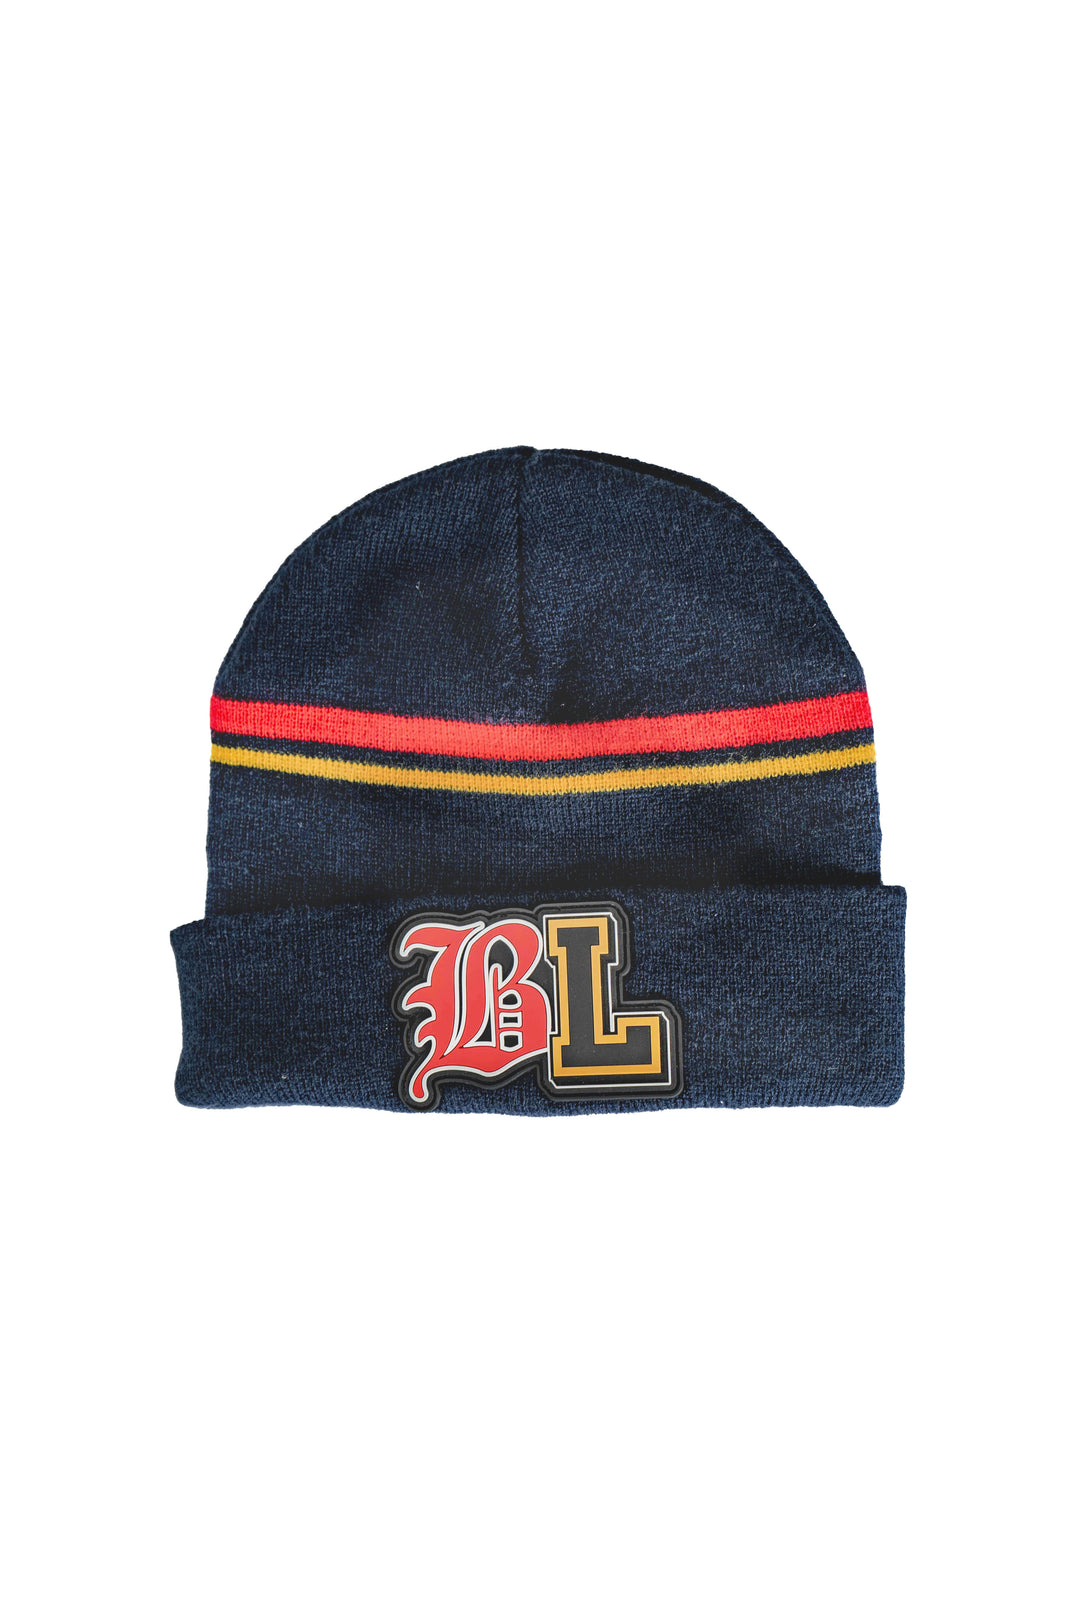 National Champs Beanie